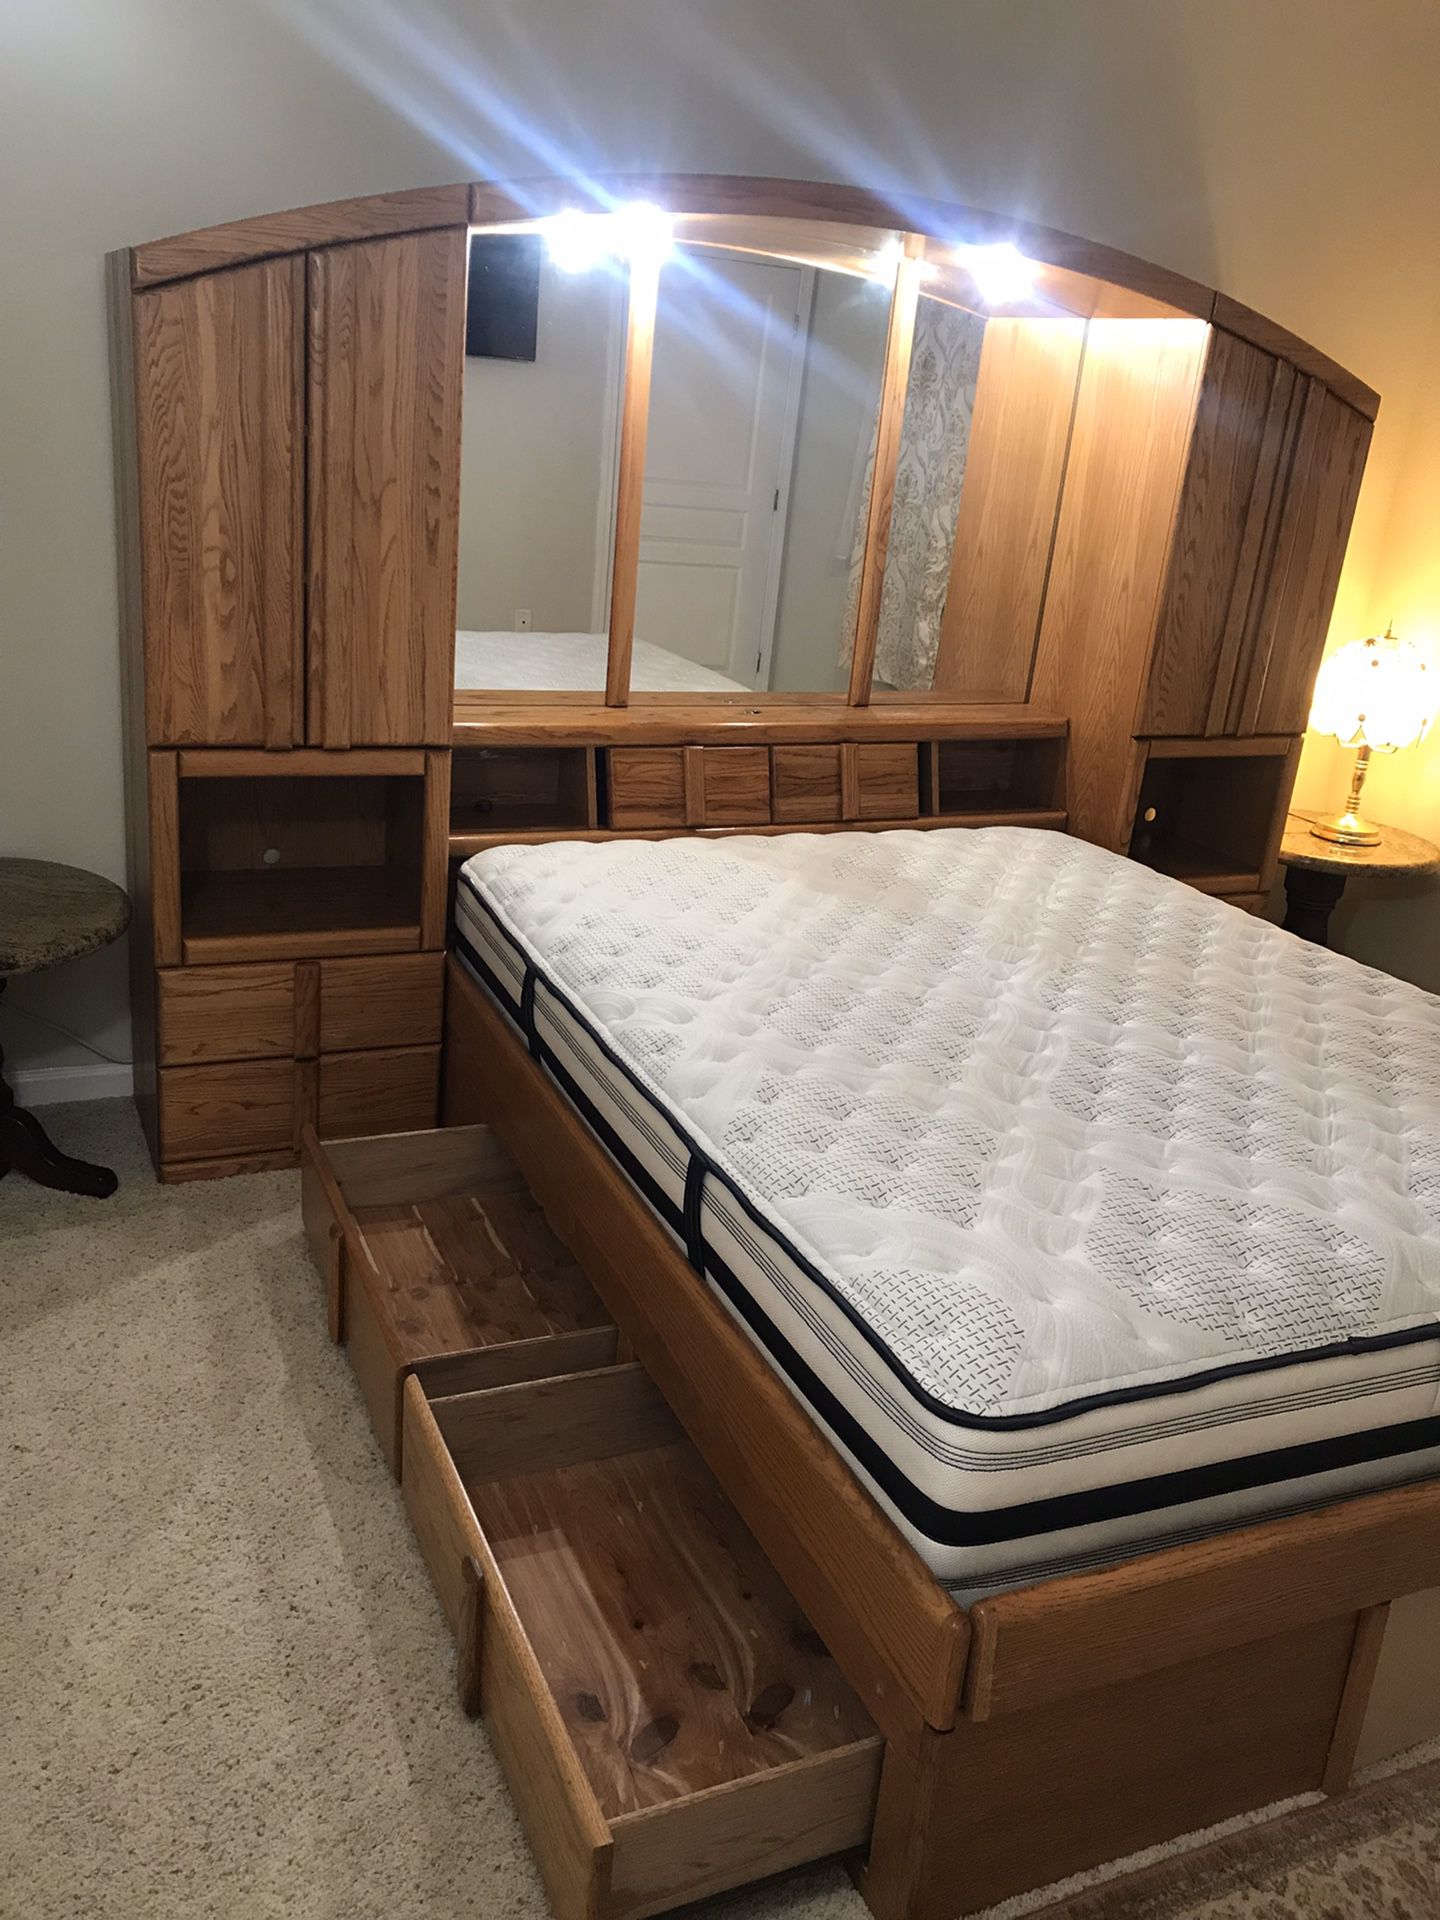 BED WITH 16 DRAWERS STORAGE $250